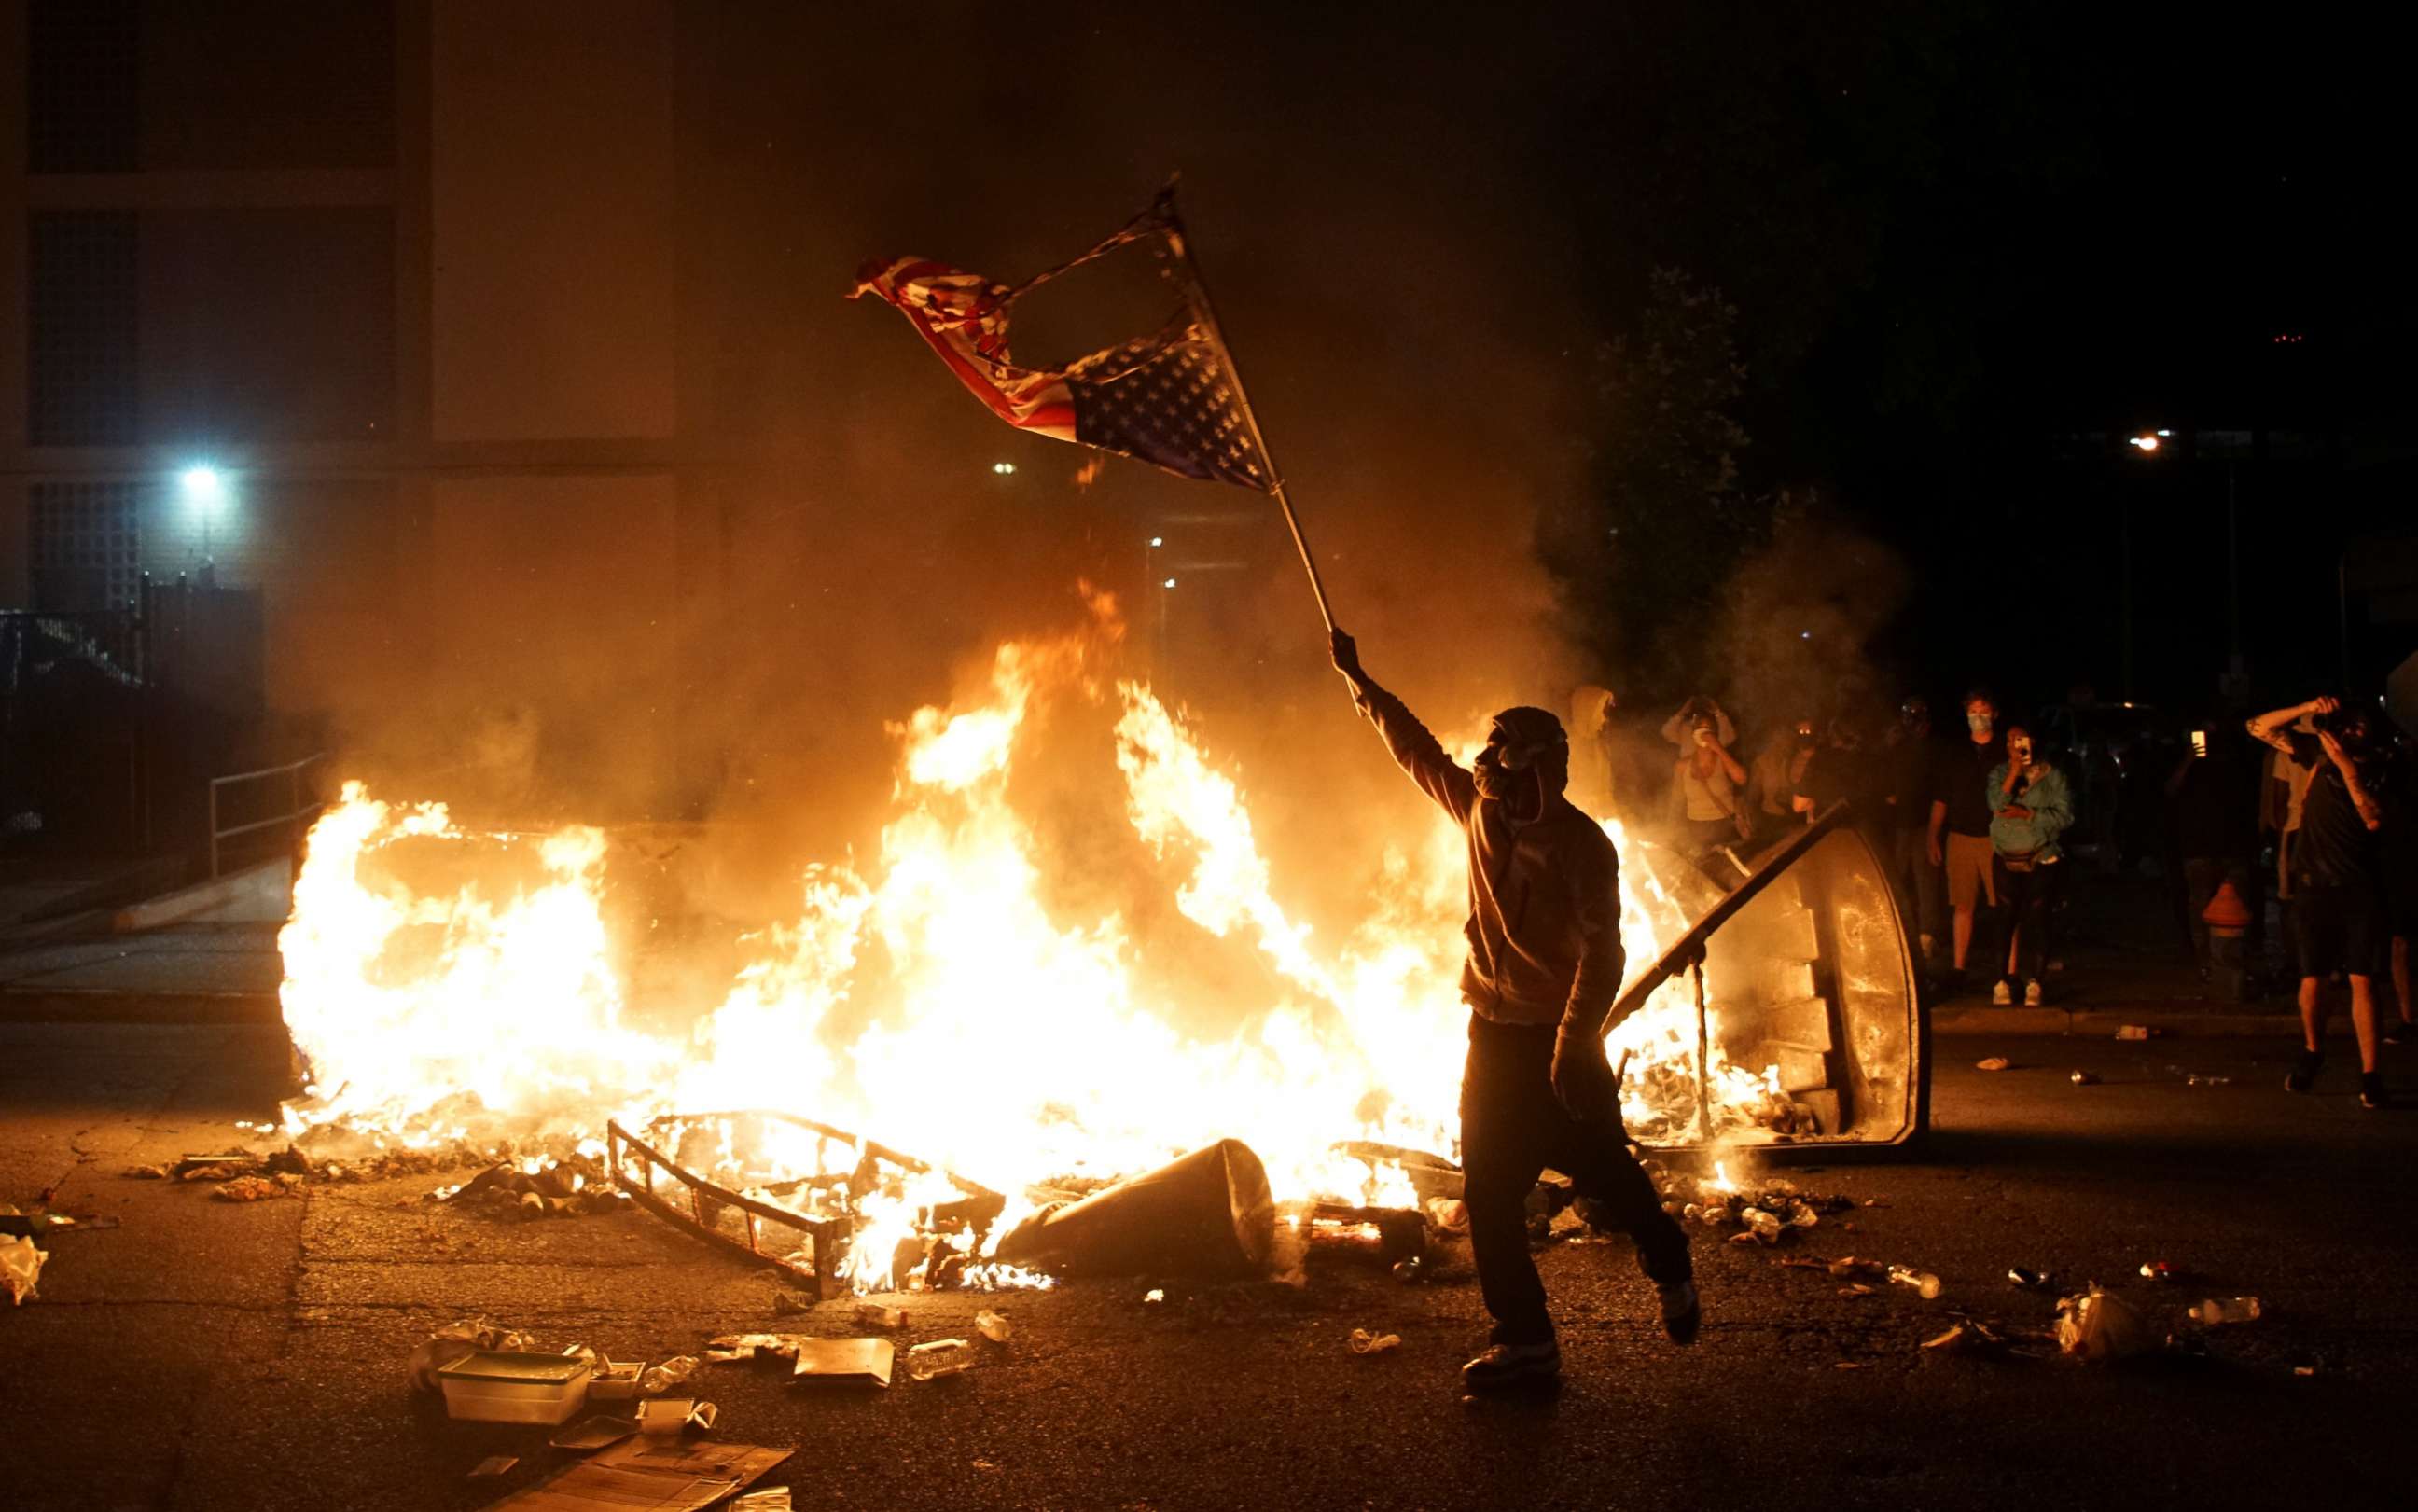 PHOTO: A protestor waves a burned American flag over a fire during a protest against the death in Minneapolis police custody of African-American man George Floyd, in St Louis, Missouri, U.S., June 1, 2020. Picture taken June 1,2020 